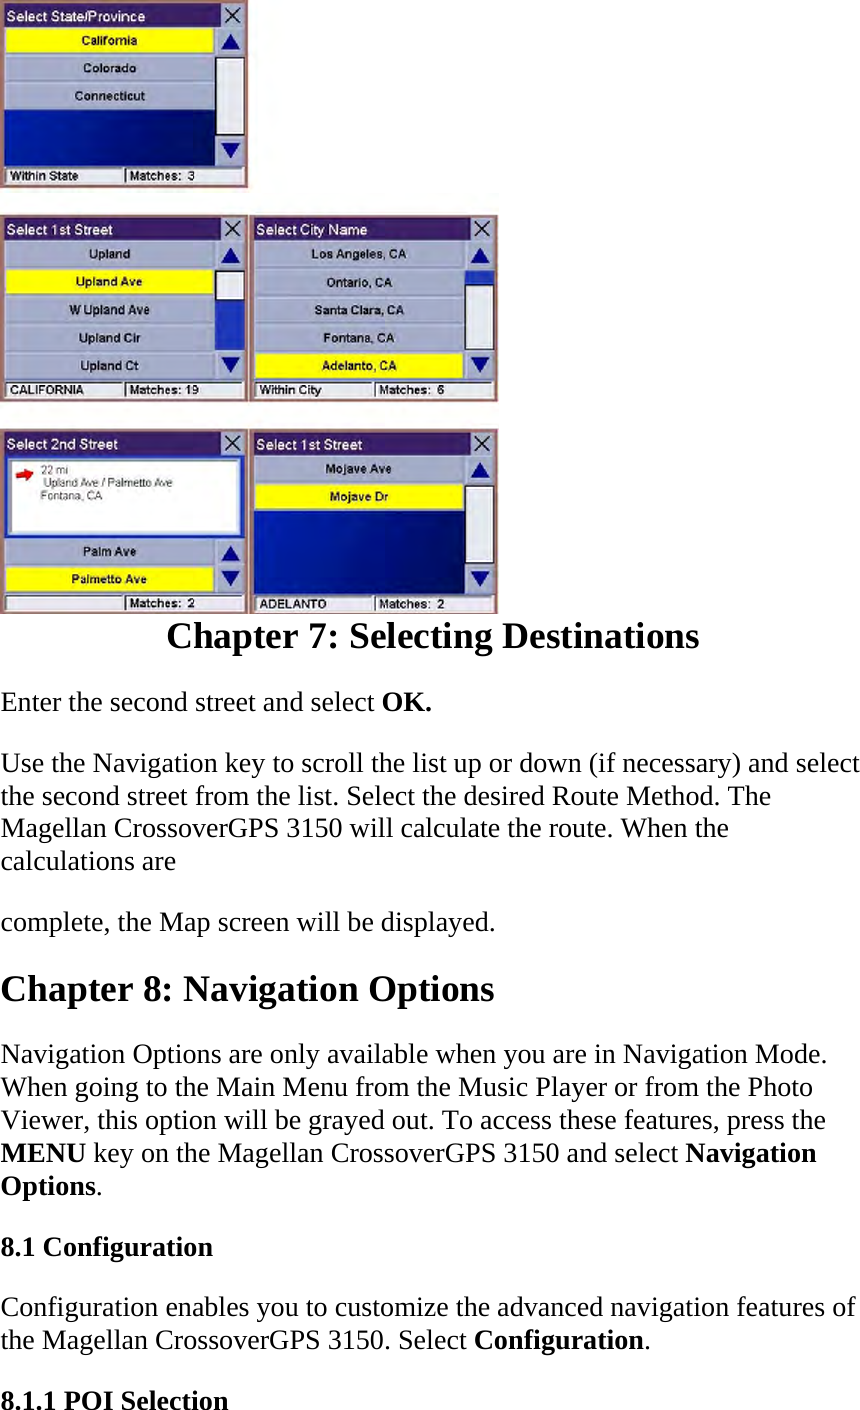  Chapter 7: Selecting Destinations  Enter the second street and select OK.  Use the Navigation key to scroll the list up or down (if necessary) and select the second street from the list. Select the desired Route Method. The Magellan CrossoverGPS 3150 will calculate the route. When the calculations are  complete, the Map screen will be displayed.  Chapter 8: Navigation Options  Navigation Options are only available when you are in Navigation Mode. When going to the Main Menu from the Music Player or from the Photo Viewer, this option will be grayed out. To access these features, press the MENU key on the Magellan CrossoverGPS 3150 and select Navigation Options.  8.1 Configuration  Configuration enables you to customize the advanced navigation features of the Magellan CrossoverGPS 3150. Select Configuration.  8.1.1 POI Selection  